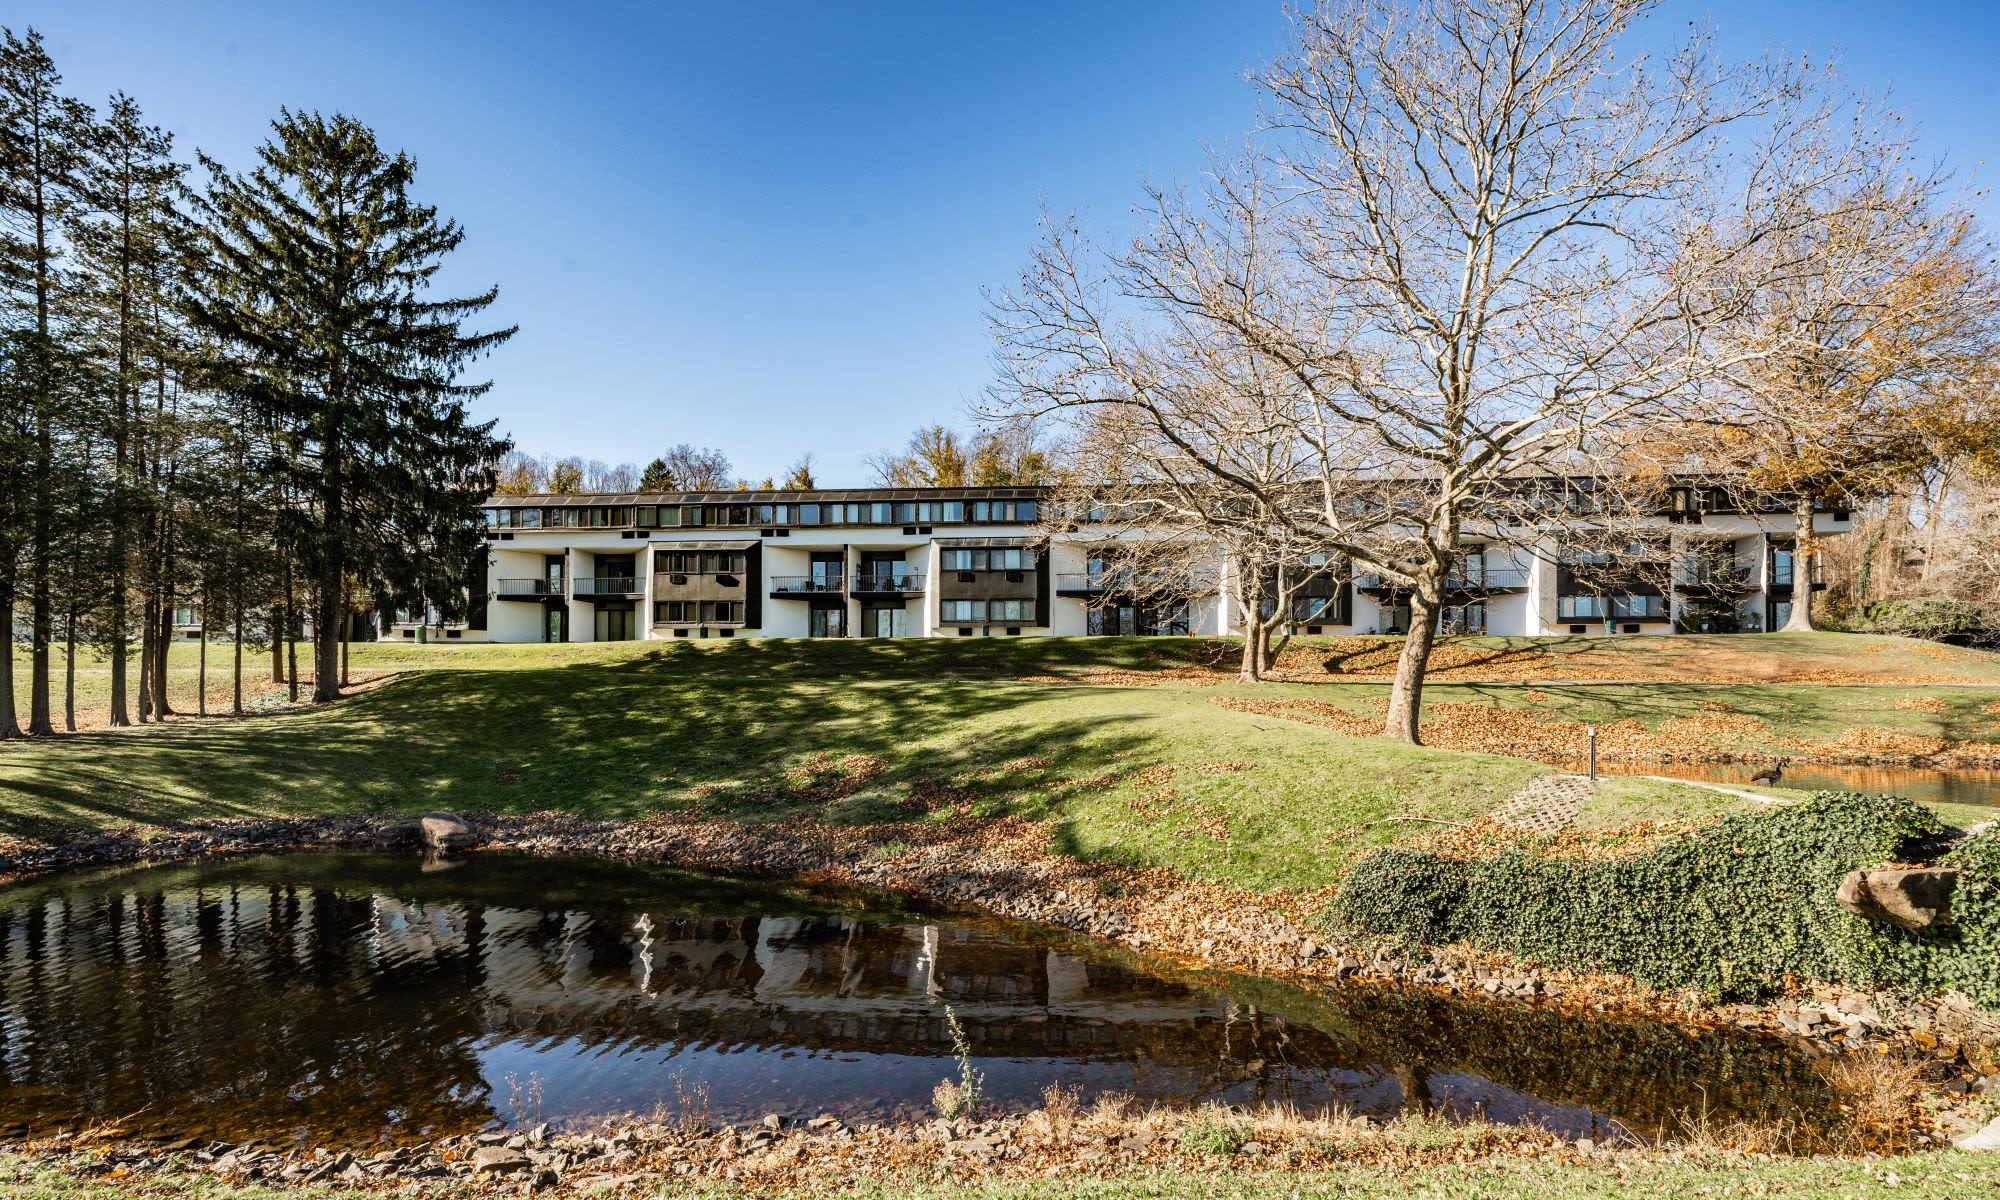 Whitewood Pond Apartments in North Haven, Connecticut